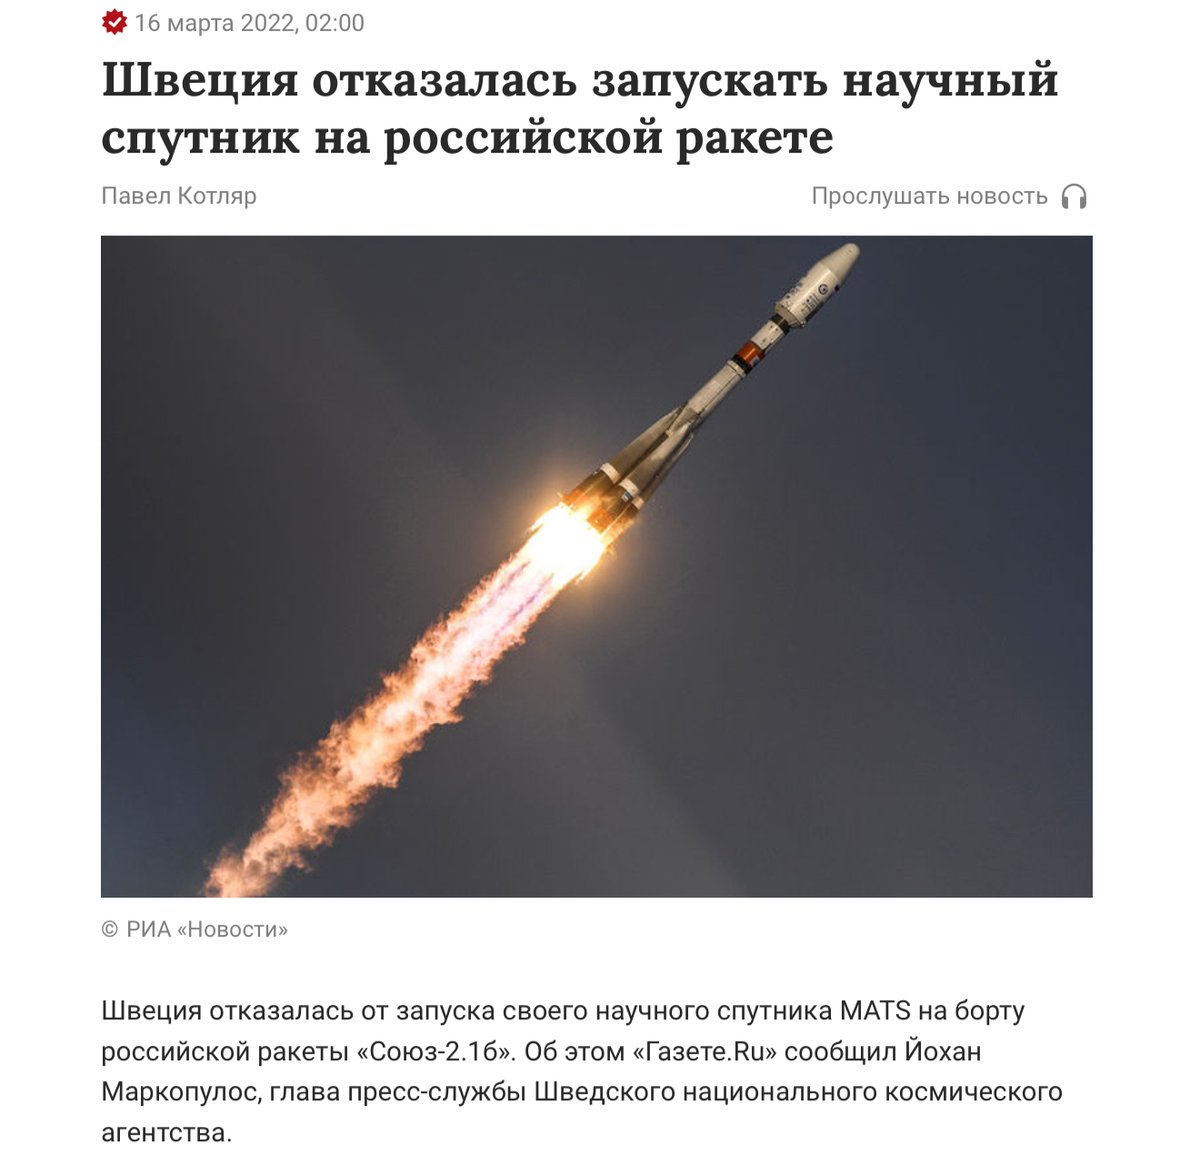 Gazeta Ru informed that Sweden has refused to launch their #MATS satellite as a secondary payload on a Russian Soyuz2.1b rocket, with a link to the press service of the SNSA @rymdstyrelsense. Roscosmos press service said, they have been not informed about this decision.